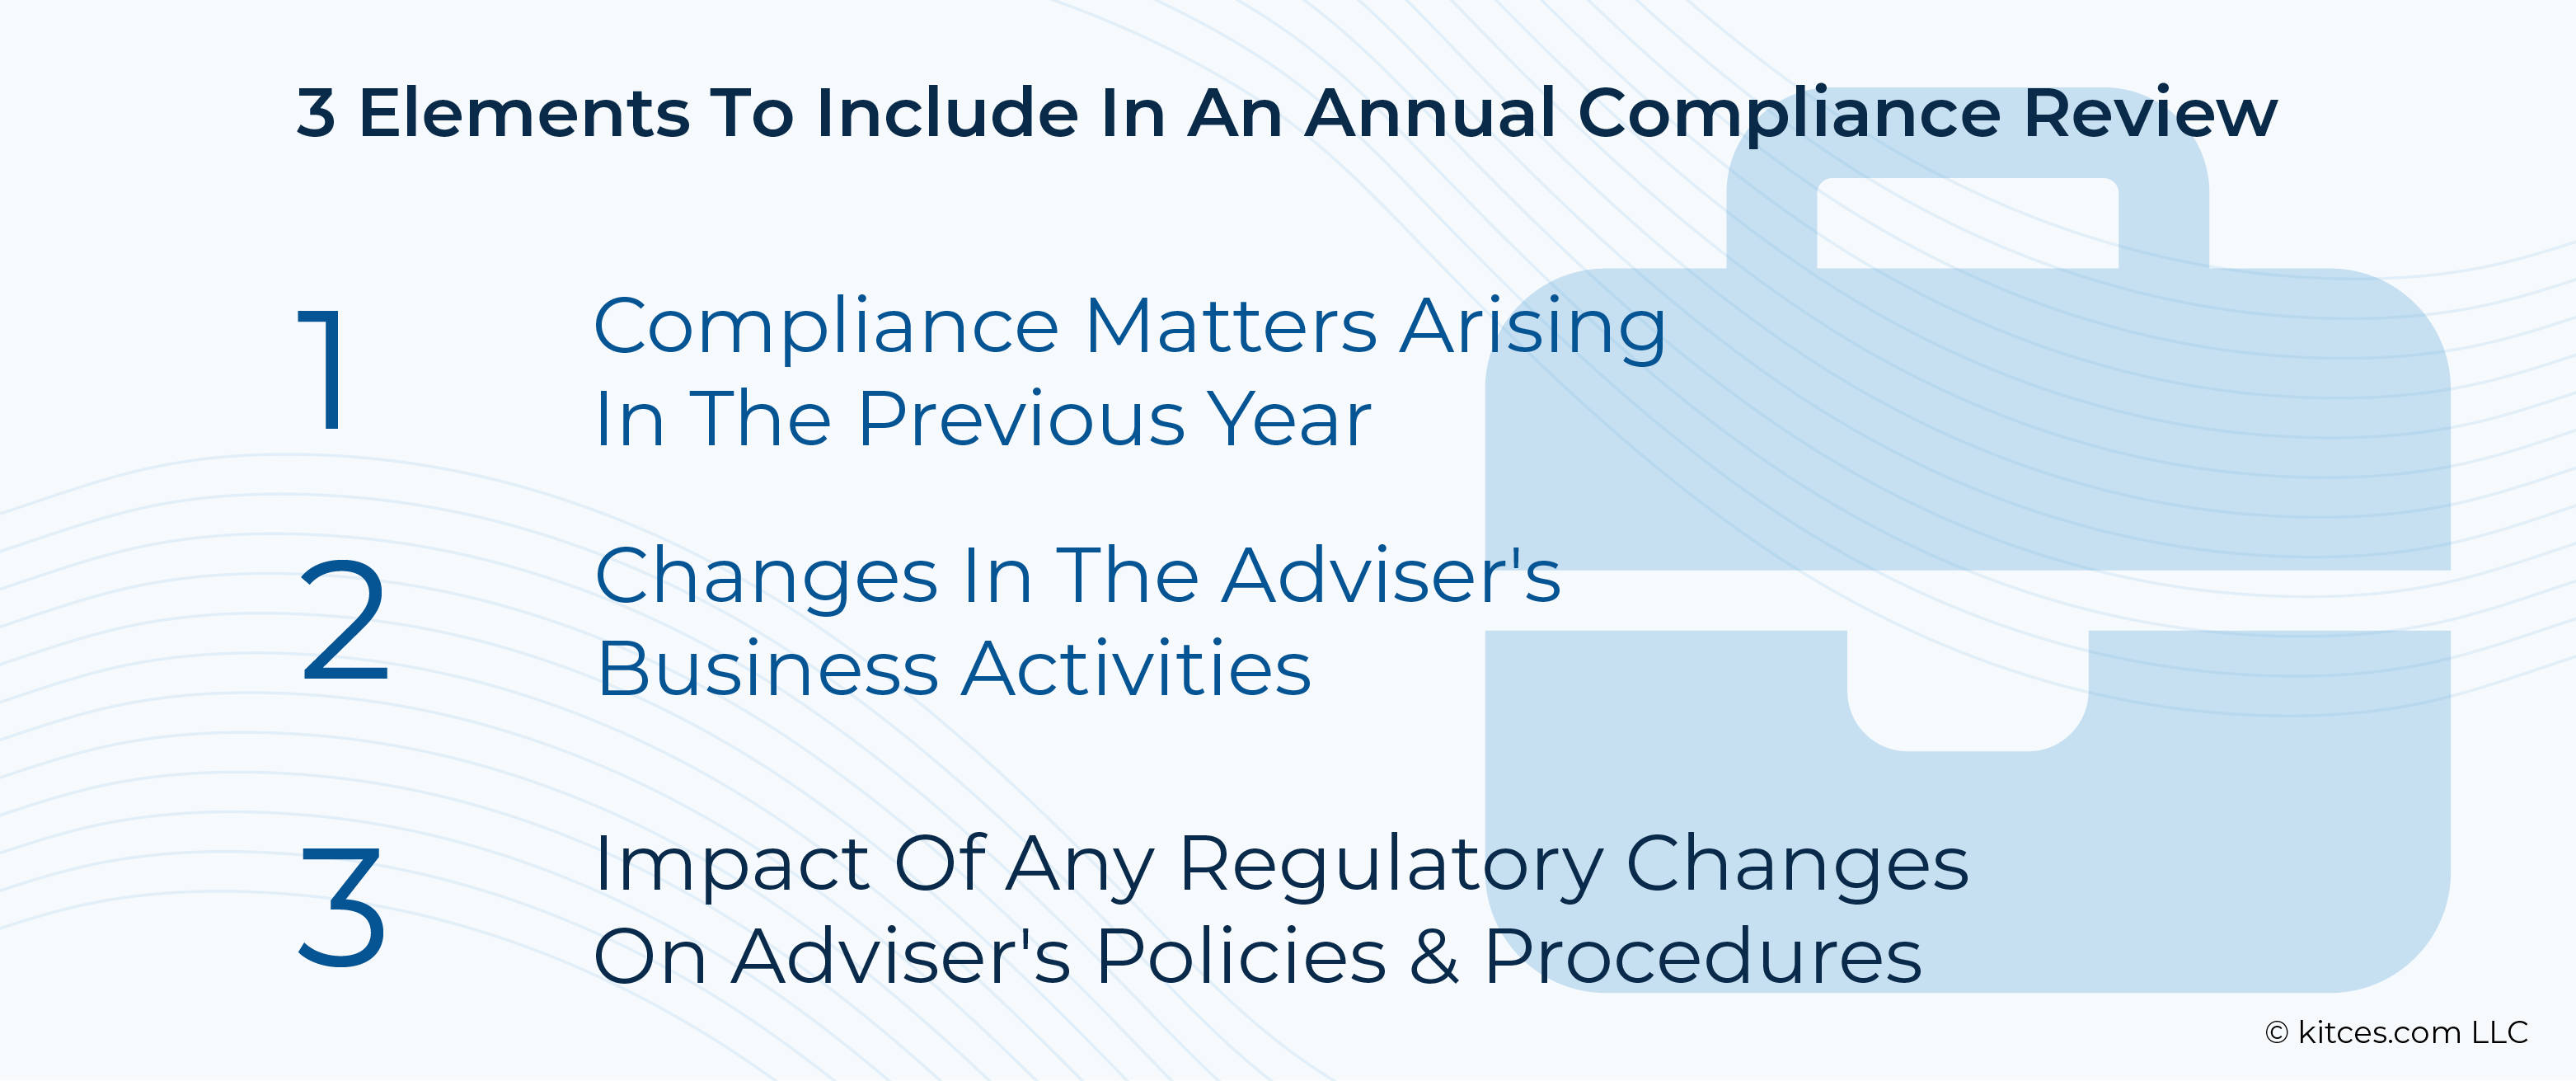 Elements To Include in an annual compliance review